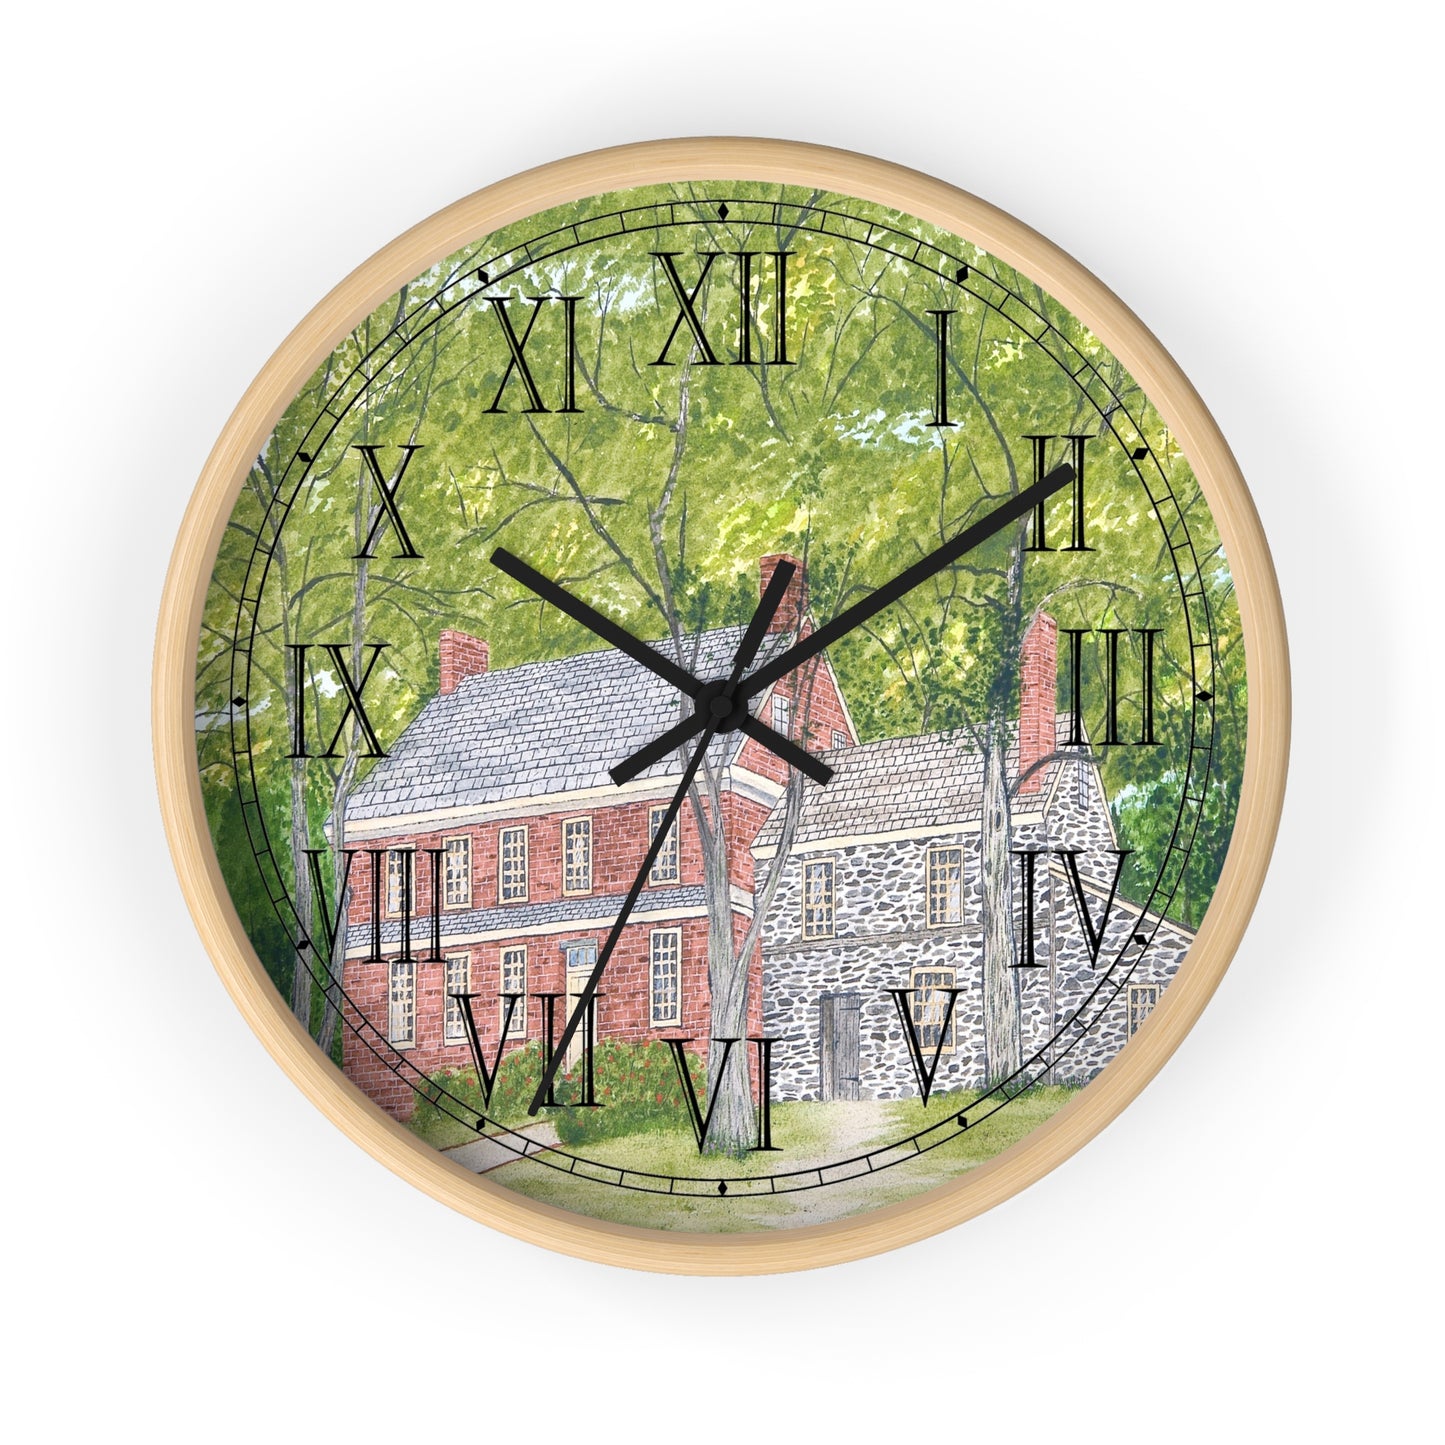 This stately Manor House, nestled in the trees, greets springtime with grace and dignity. It speaks of country charm with a sweeping lawn, lovely flowers, and a charming gazebo. You’ll relax and feel refreshed as you imagine yourself as a guest at the Manor House. This clock features Roman Numerals, and will give any room a classic touch.     The clock image is a reproduction of an original watercolor by Lee M. Buchanan. 